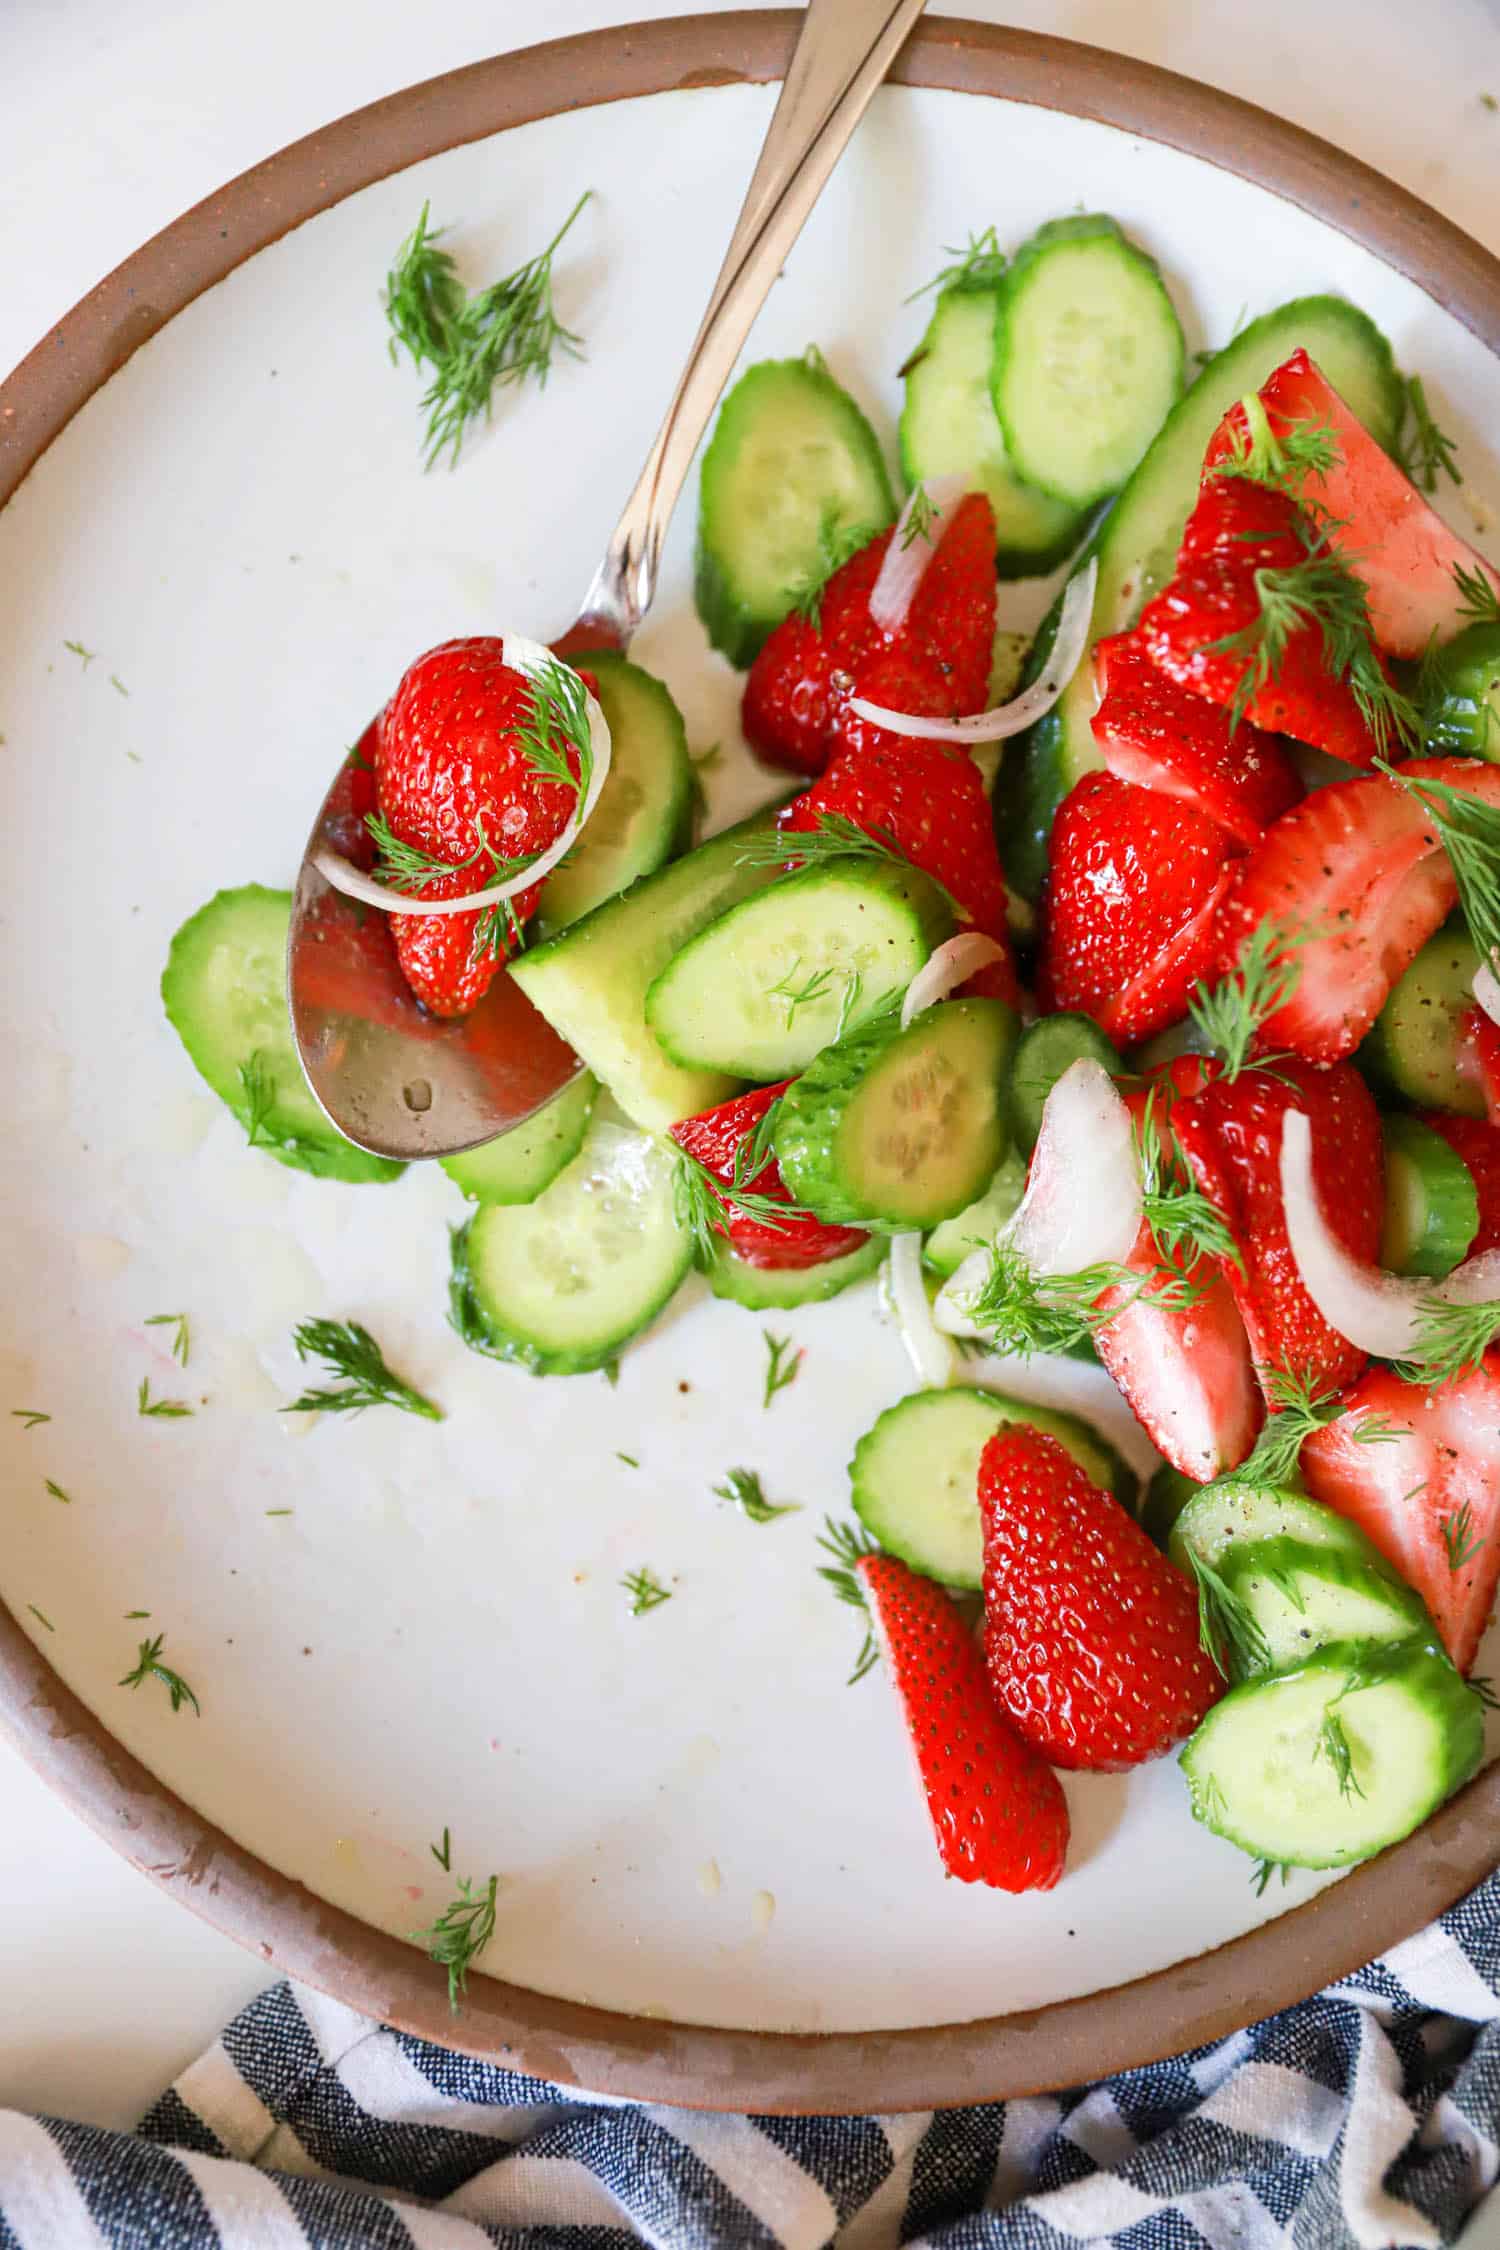 Plate of half eaten strawberry cucumber salad with silver serving spoon.